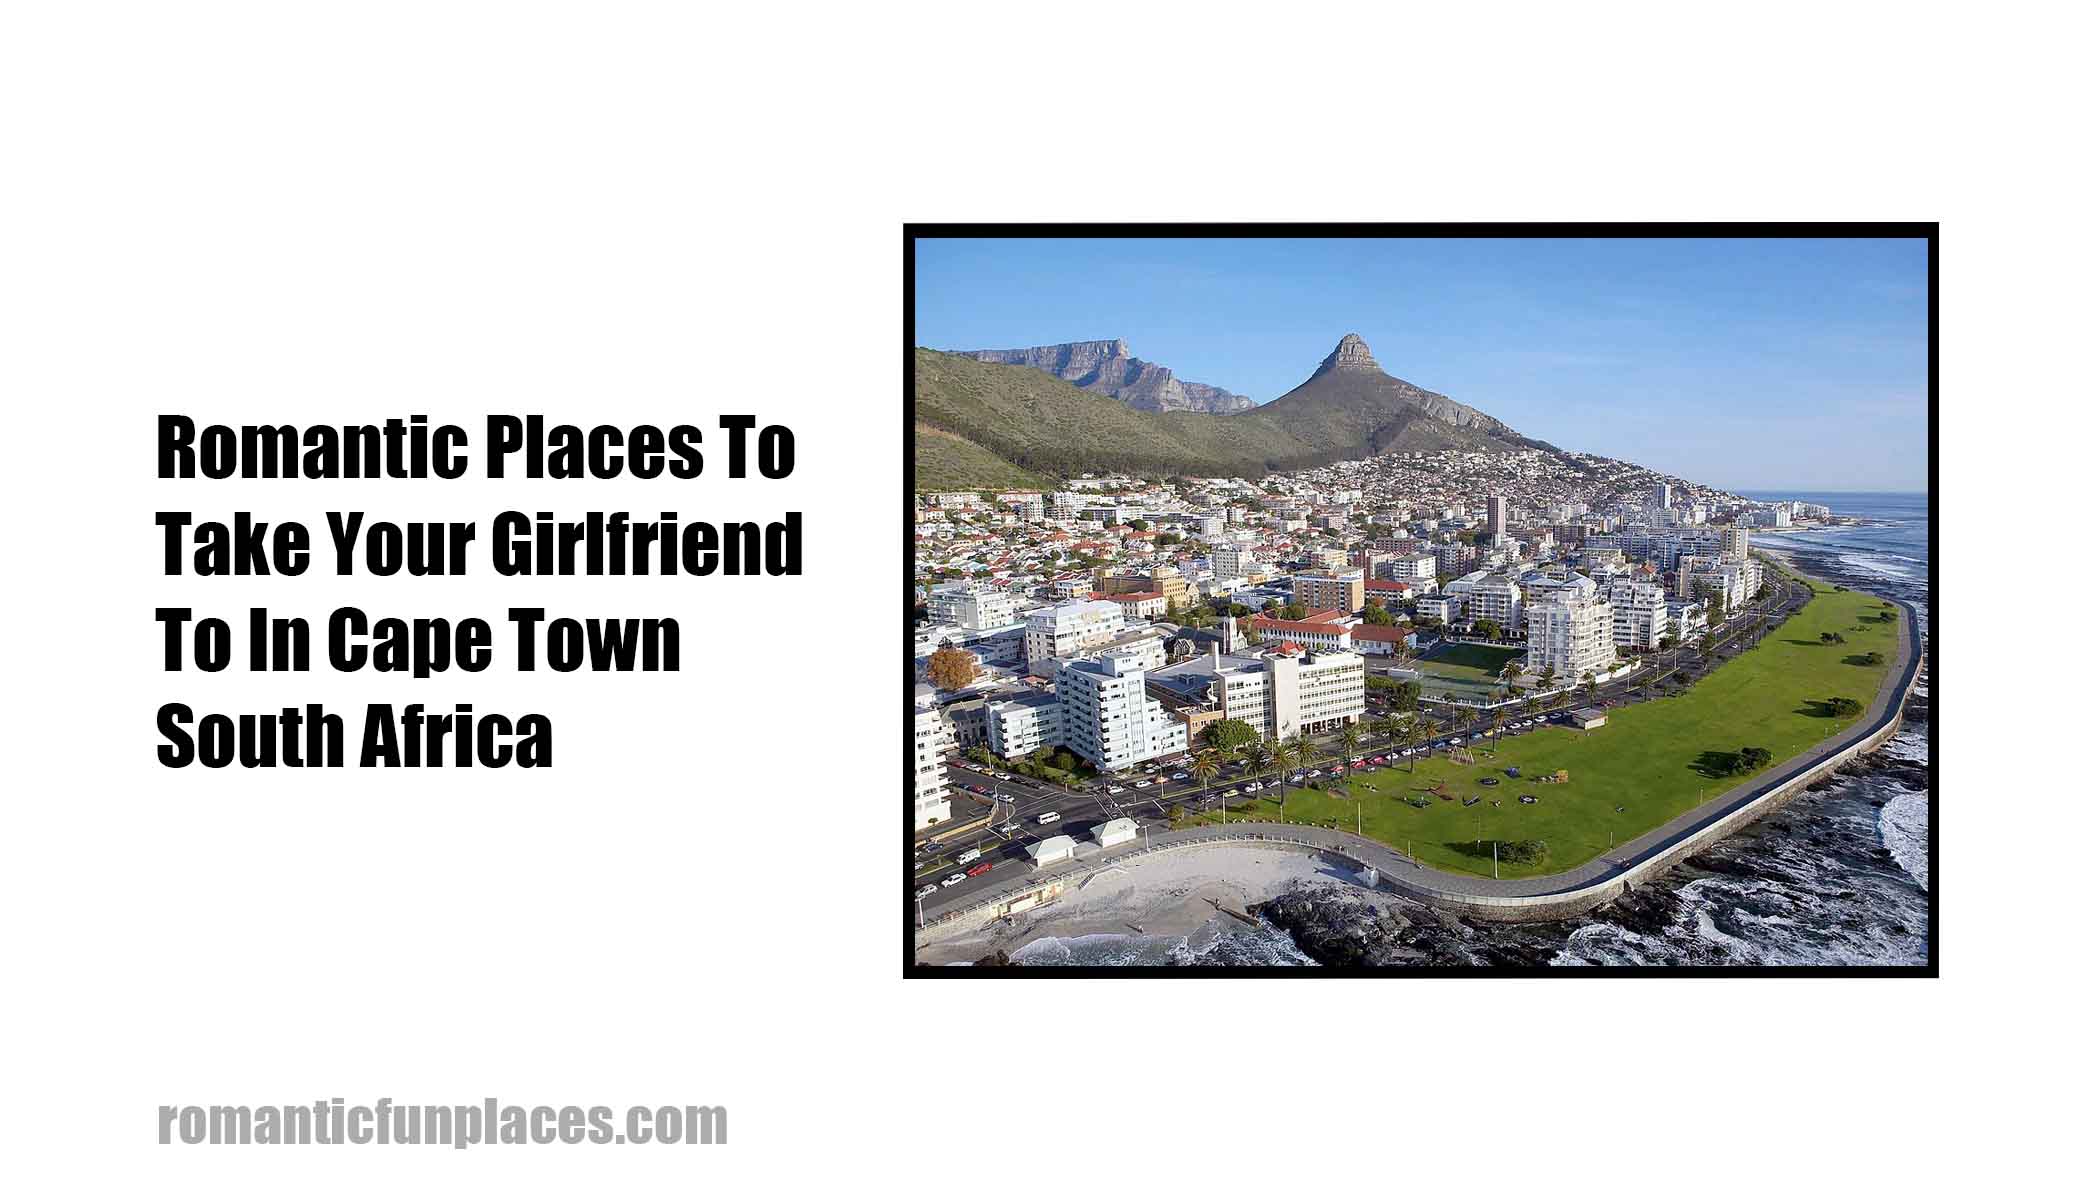 Romantic Places To Take Your Girlfriend To In Cape Town South Africa 